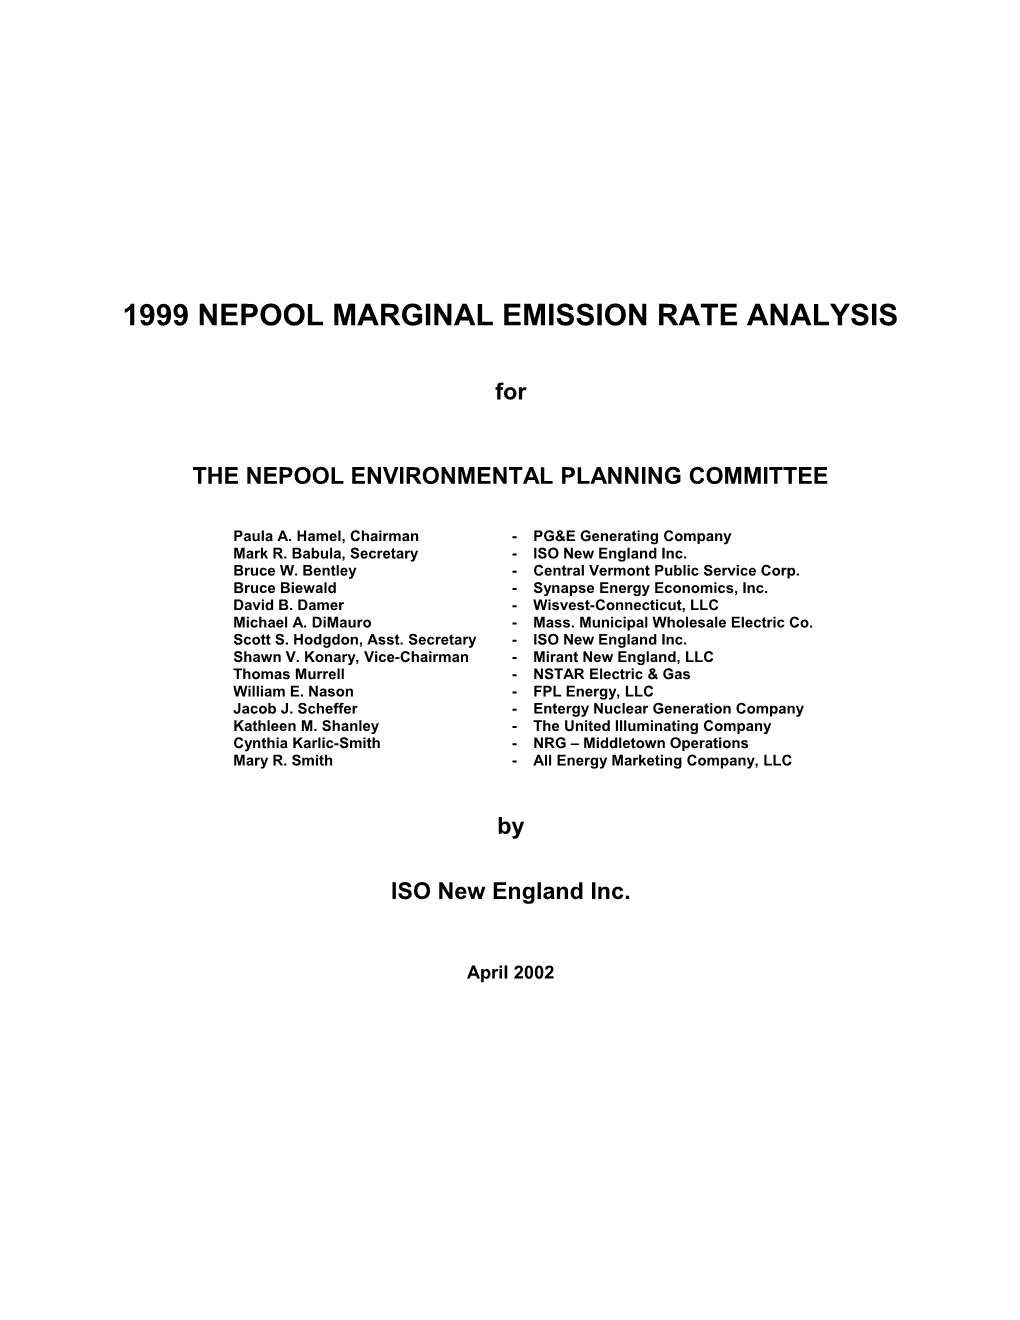 The Nepool ENVIRONMENTAL PLANNING COMMITTEE